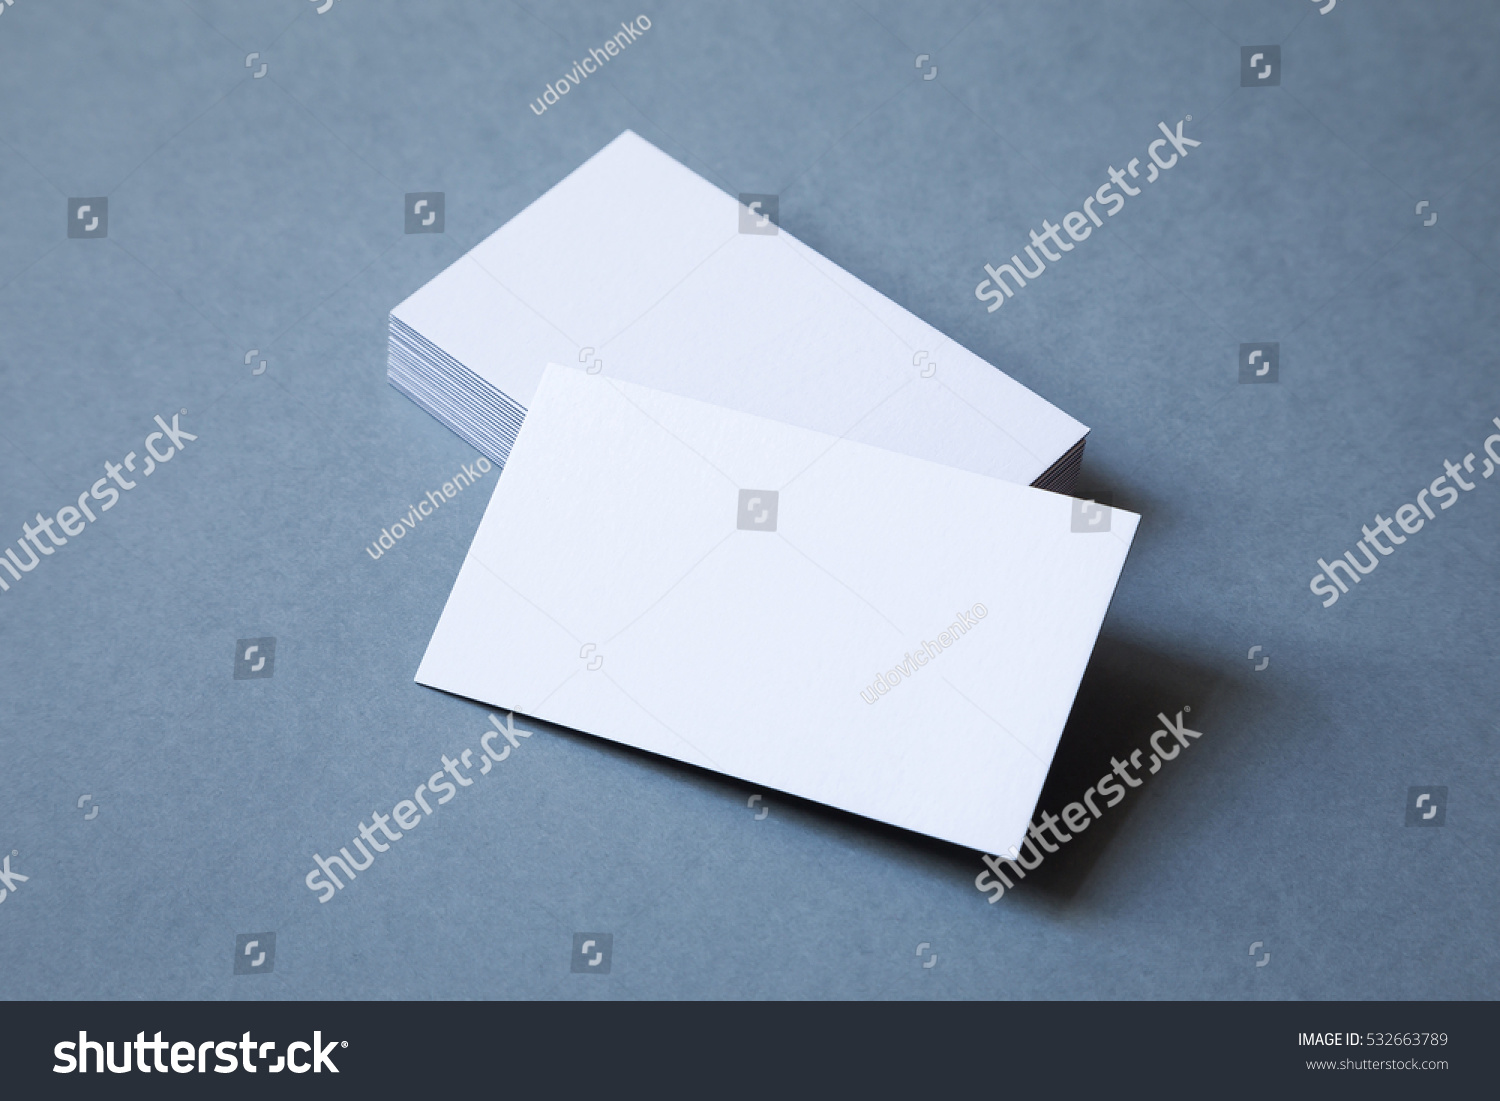 Stack of thick blank business cards on a grey background, top view. The top card is shifted to front. #532663789